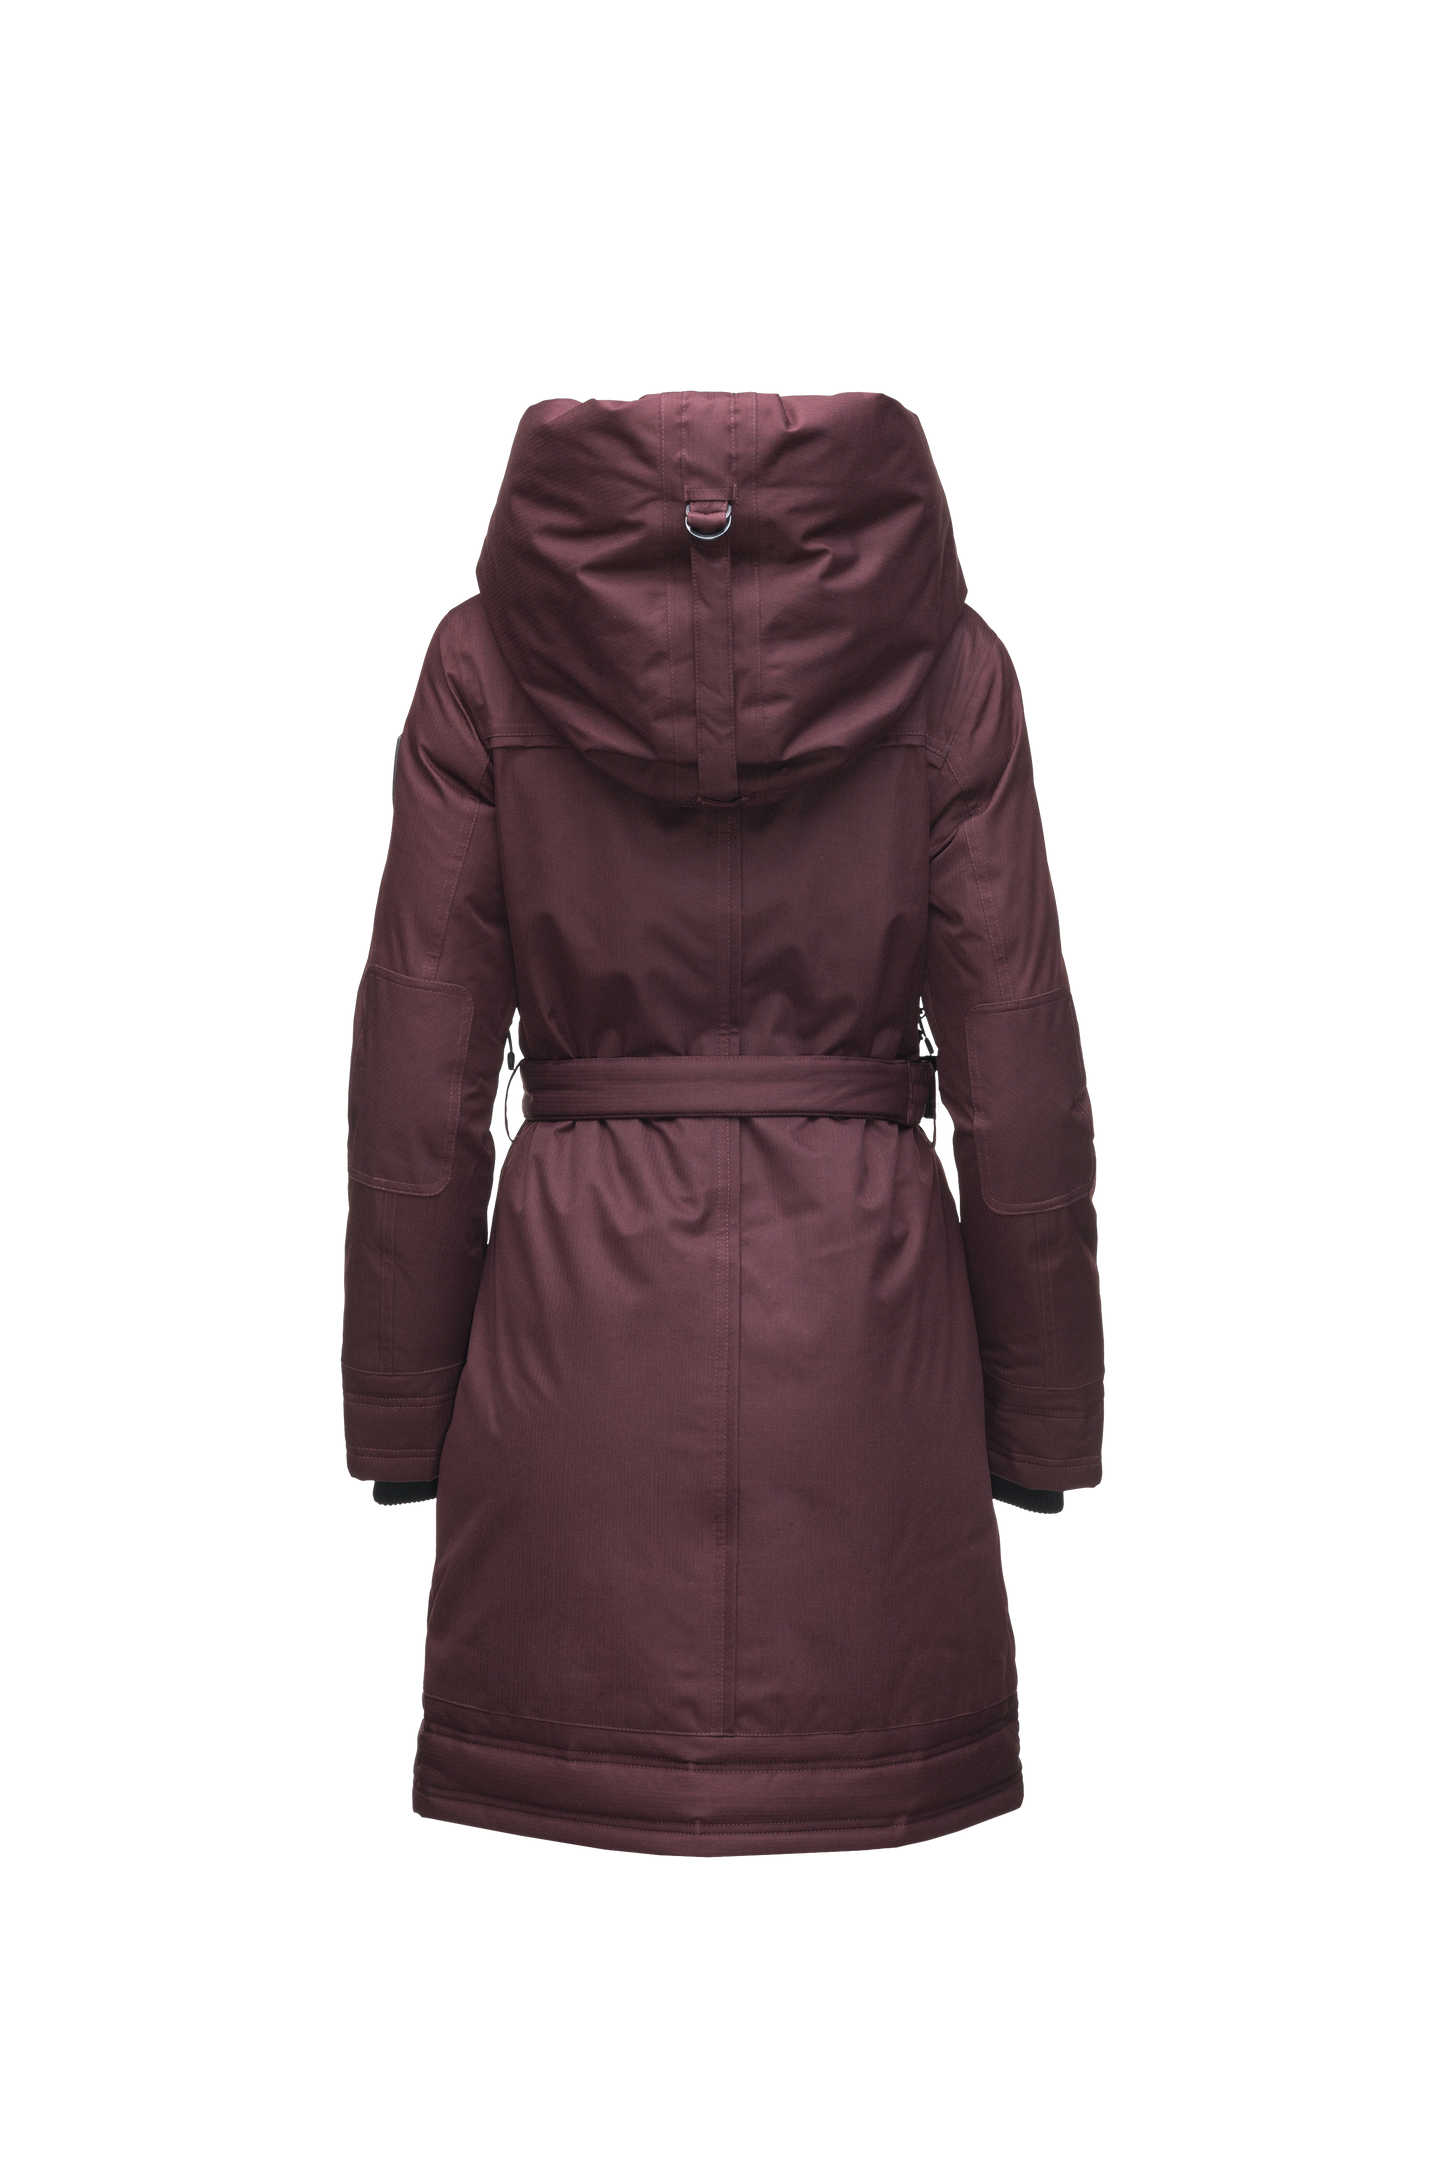 Women's Thigh length own parka with a furless oversized hood in Merlot